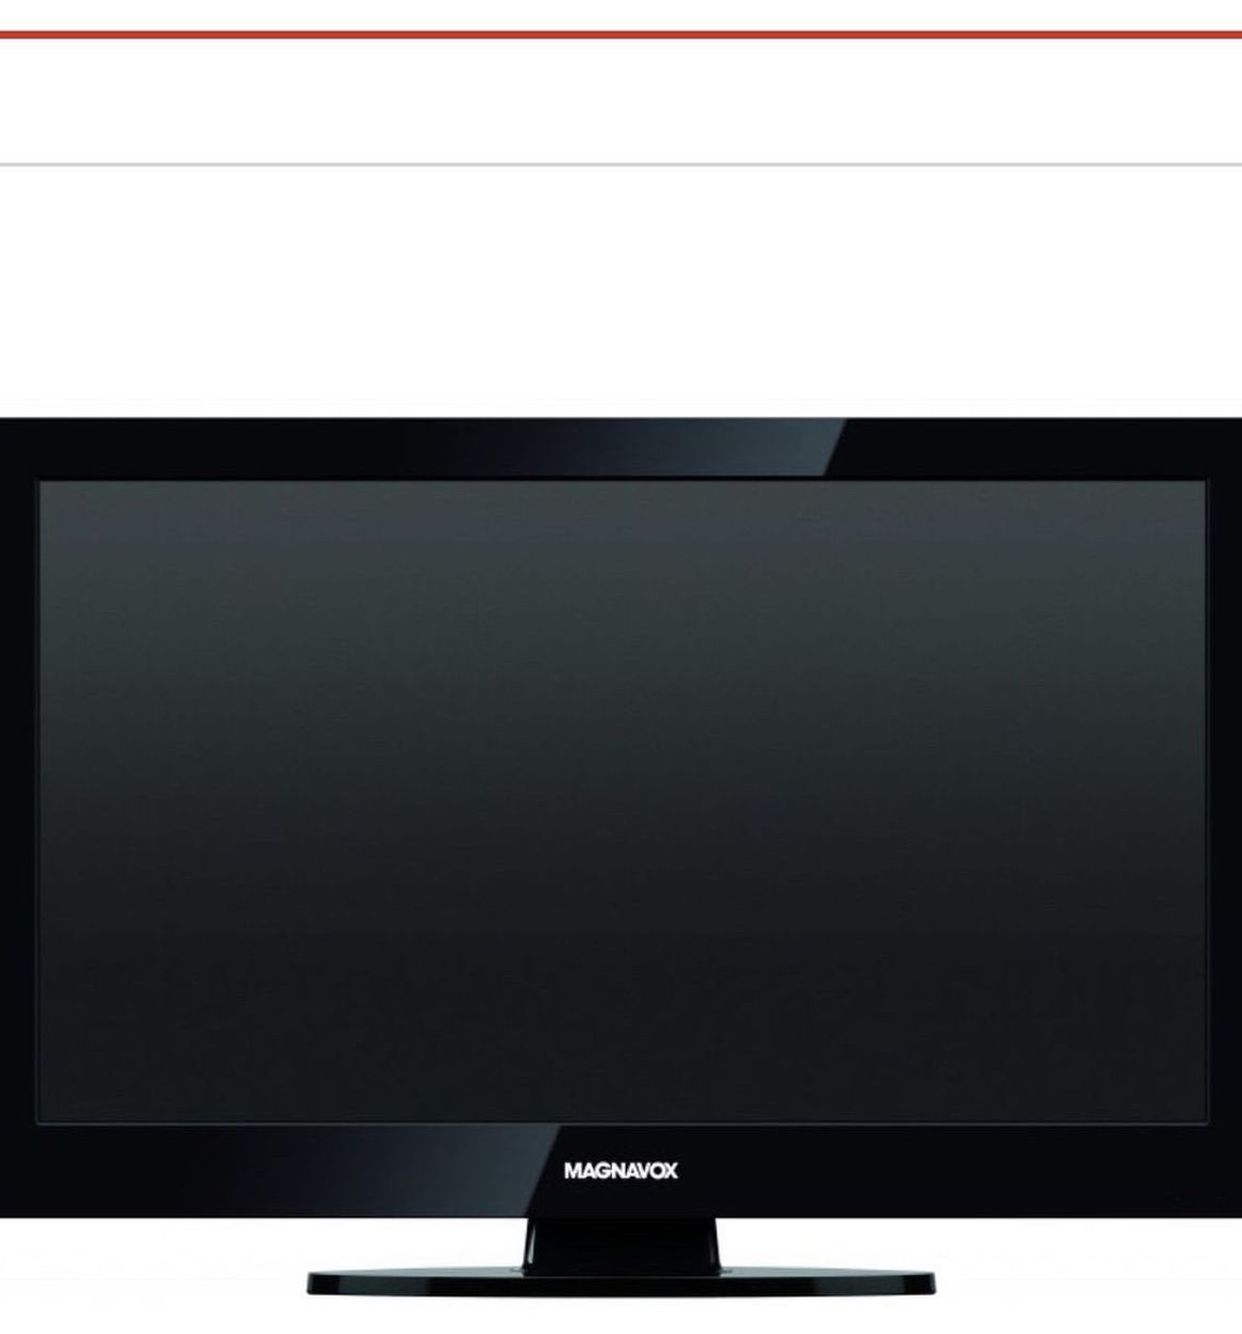 Magnavox 40 Inch LCD TV Used For Sale